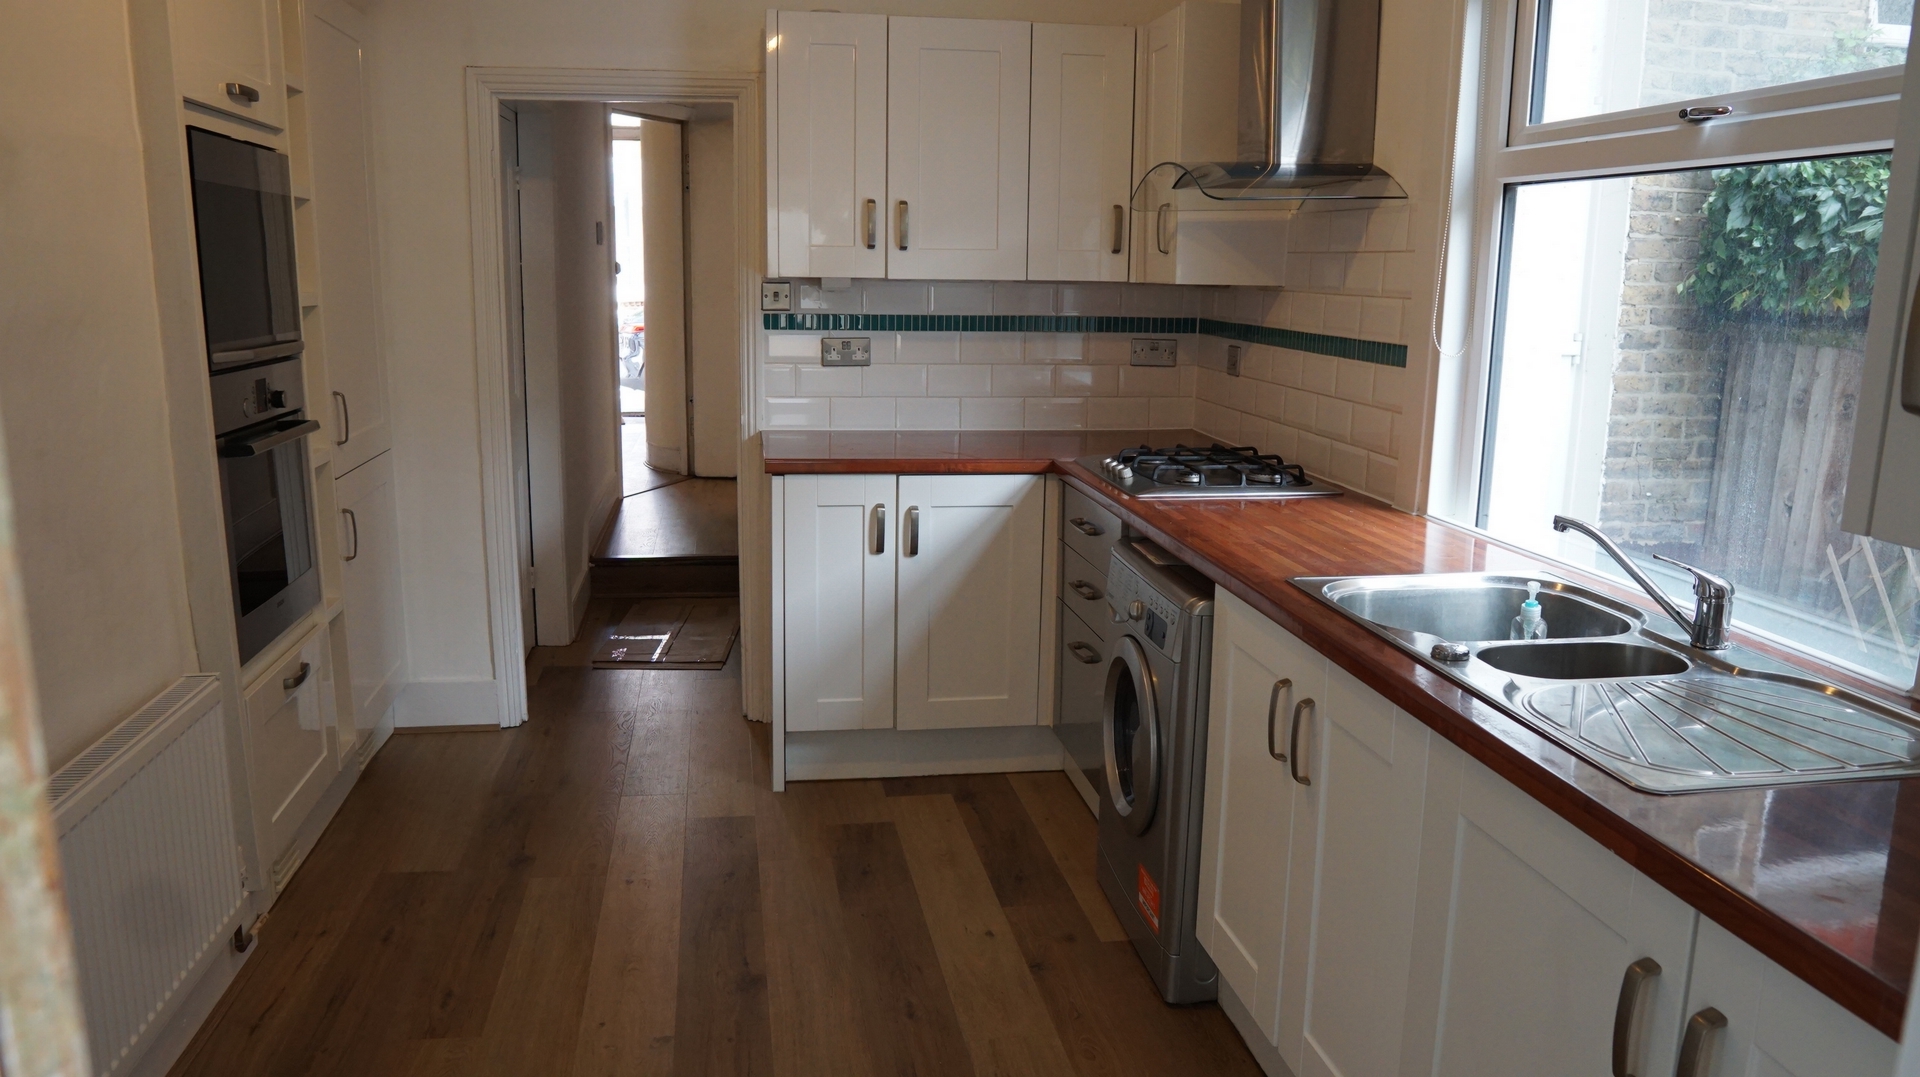 1 Bedroom Conversion to rent in Clapham, London, SW11